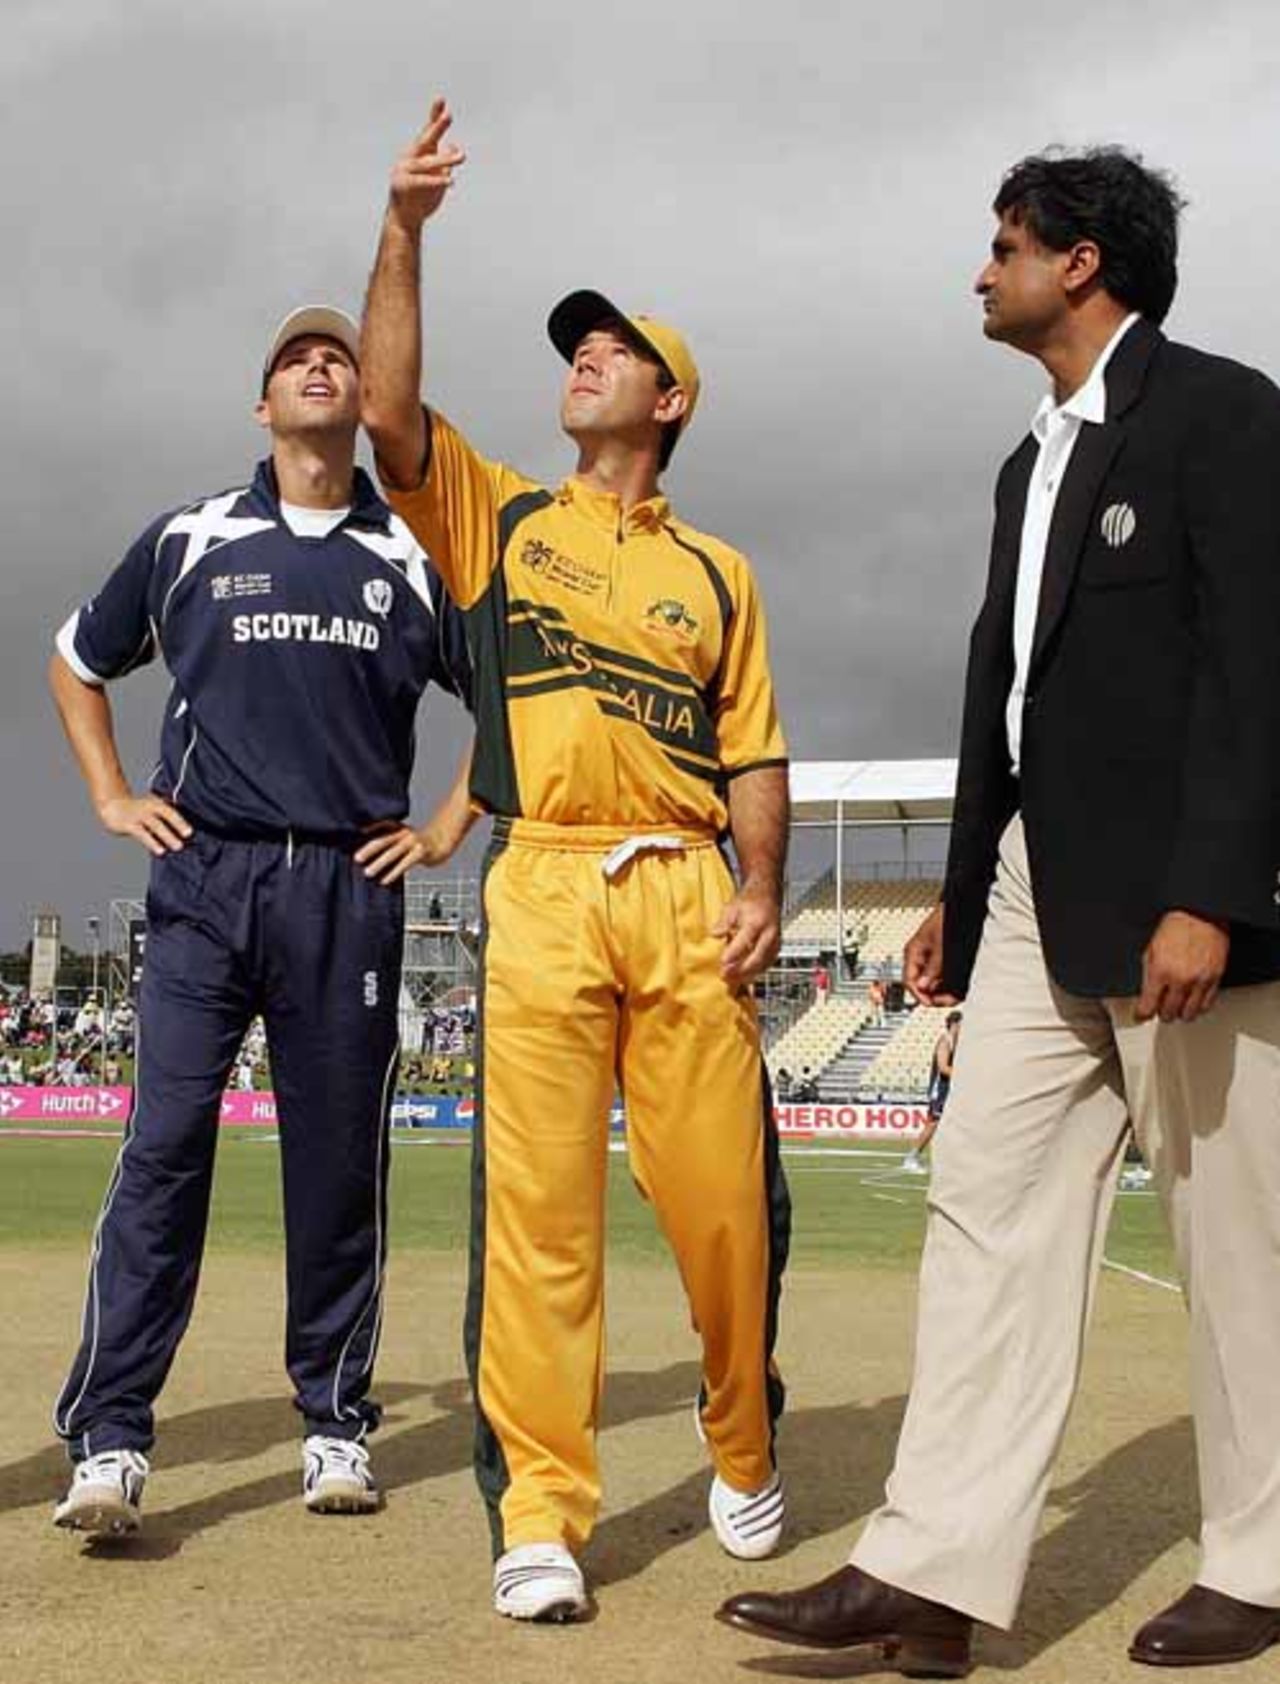 Ricky Ponting throws the coin in the air and Scotland captain Craig Wright calls right, Australia v Scotland, Group A, Basseterre, 2007 World Cup, March 14, 2007